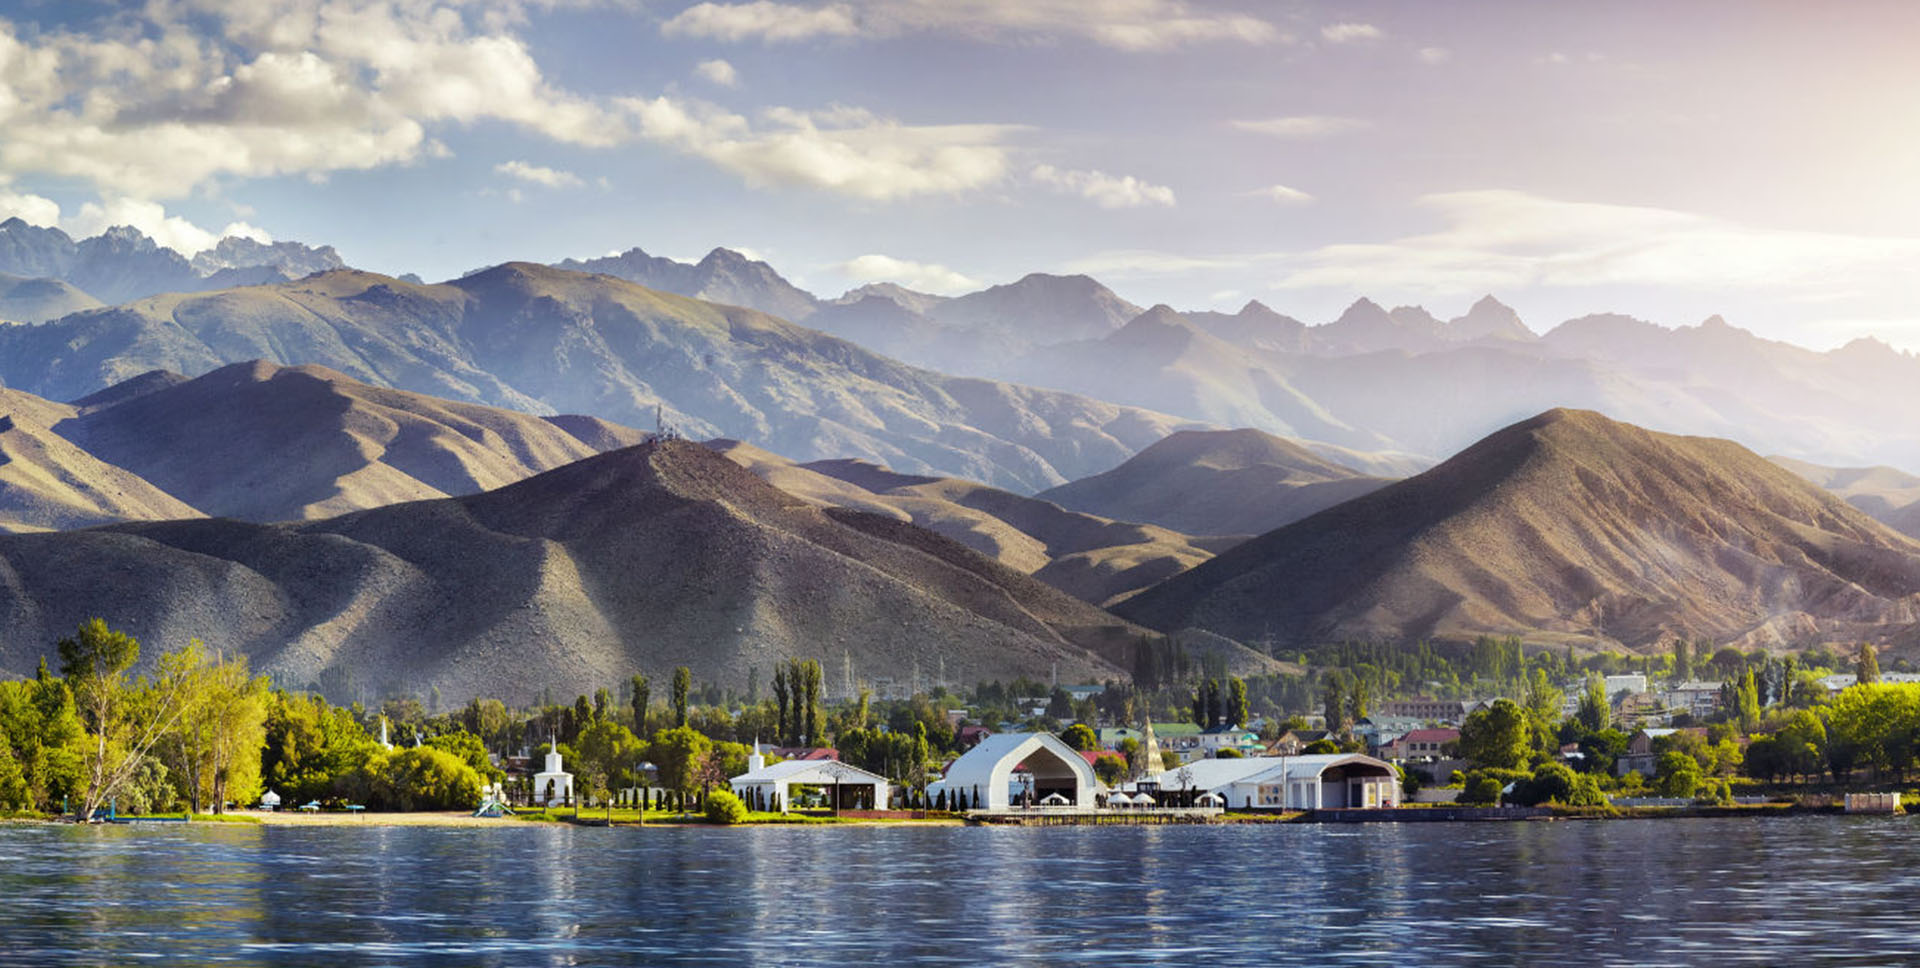 Do you know the sights of Kyrgyzstan?